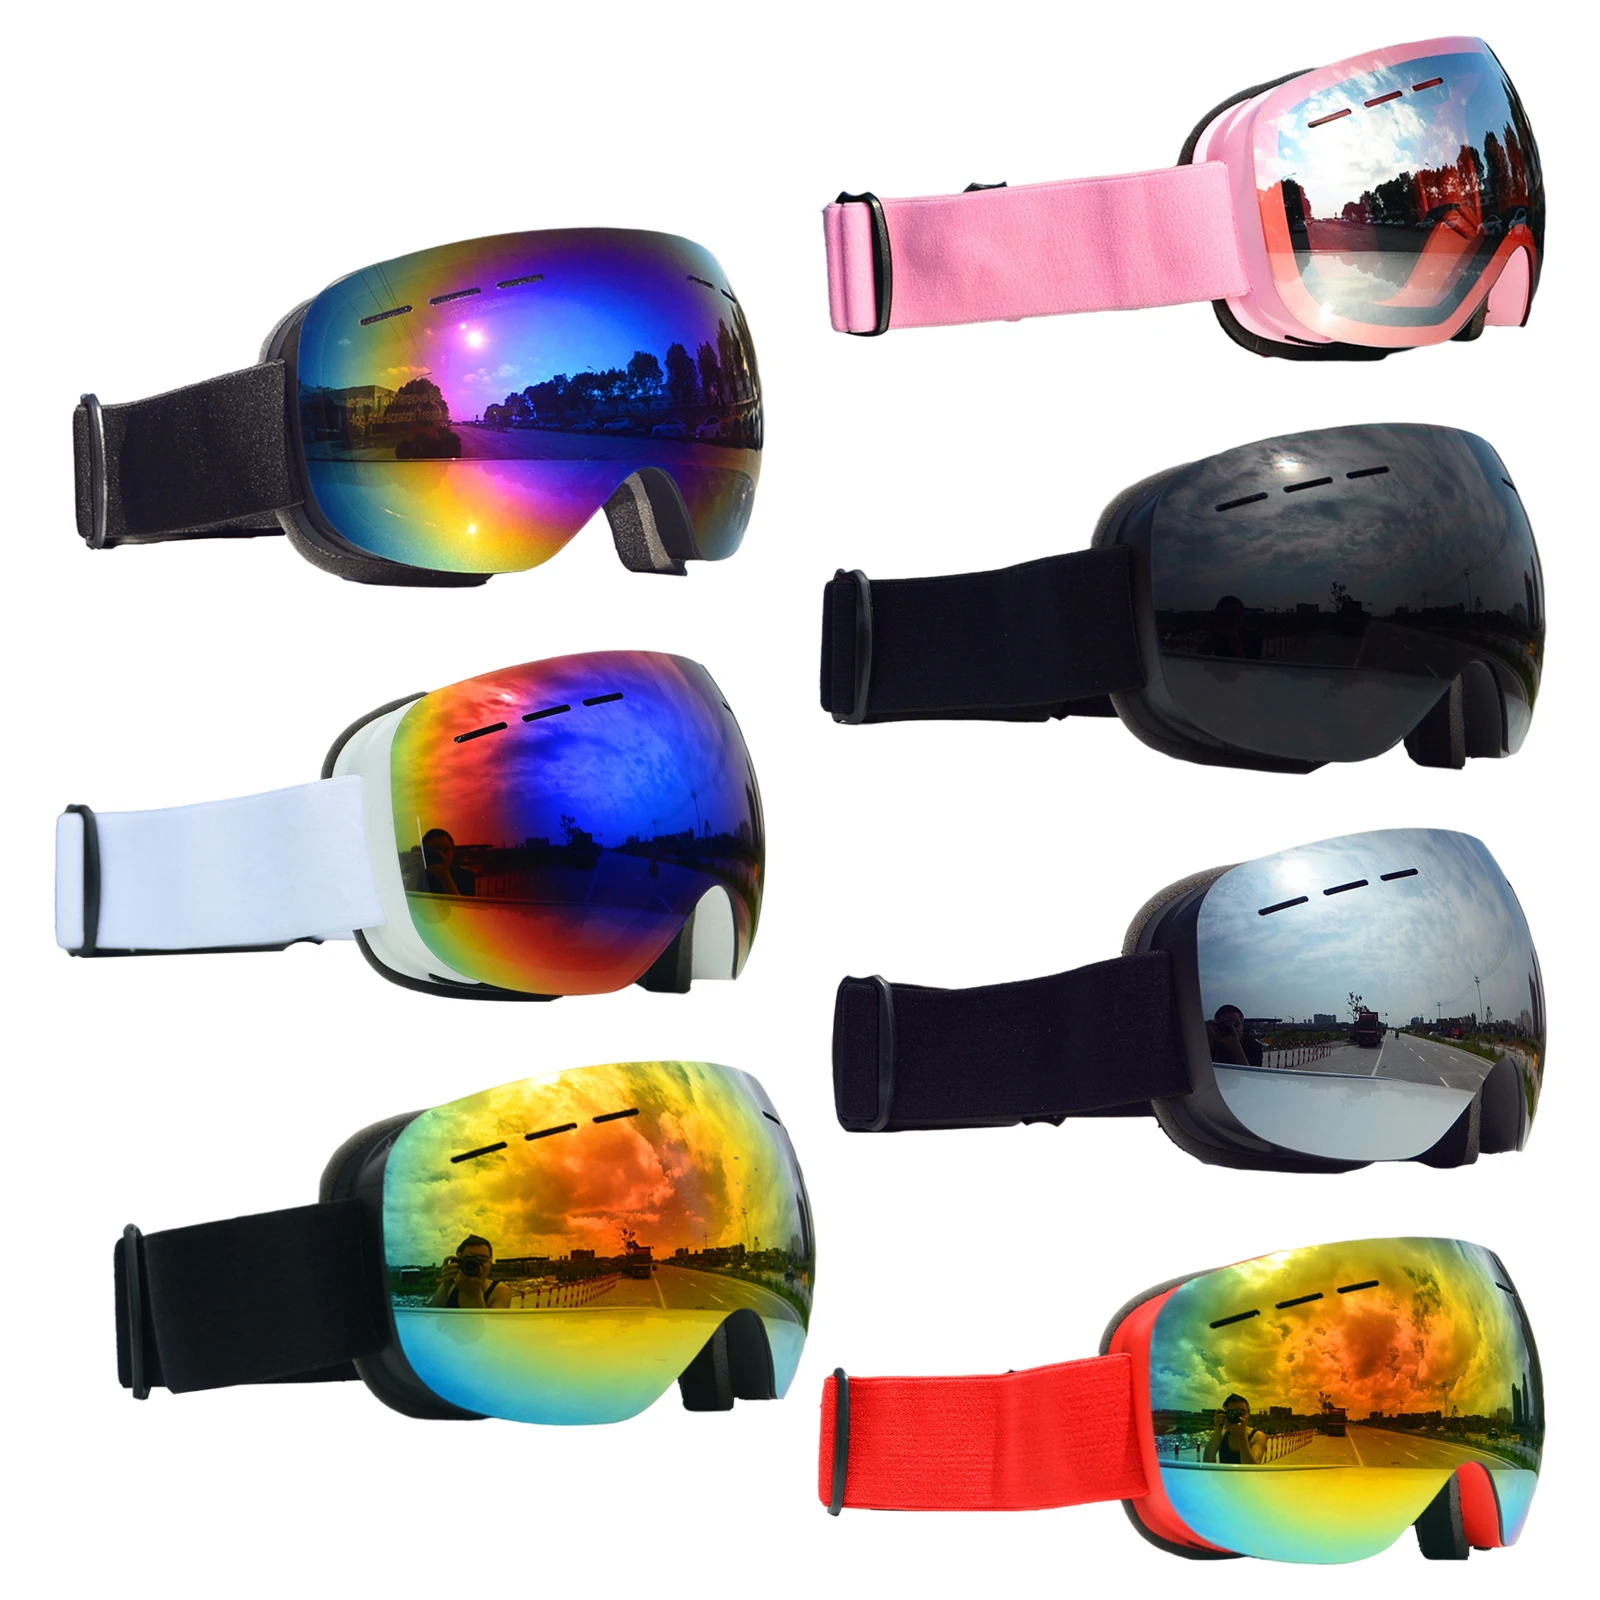 Ski Goggles Scratchproof Premium Snow Windproof Dustproof Glasses for Snowmobil Skiing Motorcycle Grunge Bike Motocross Youth